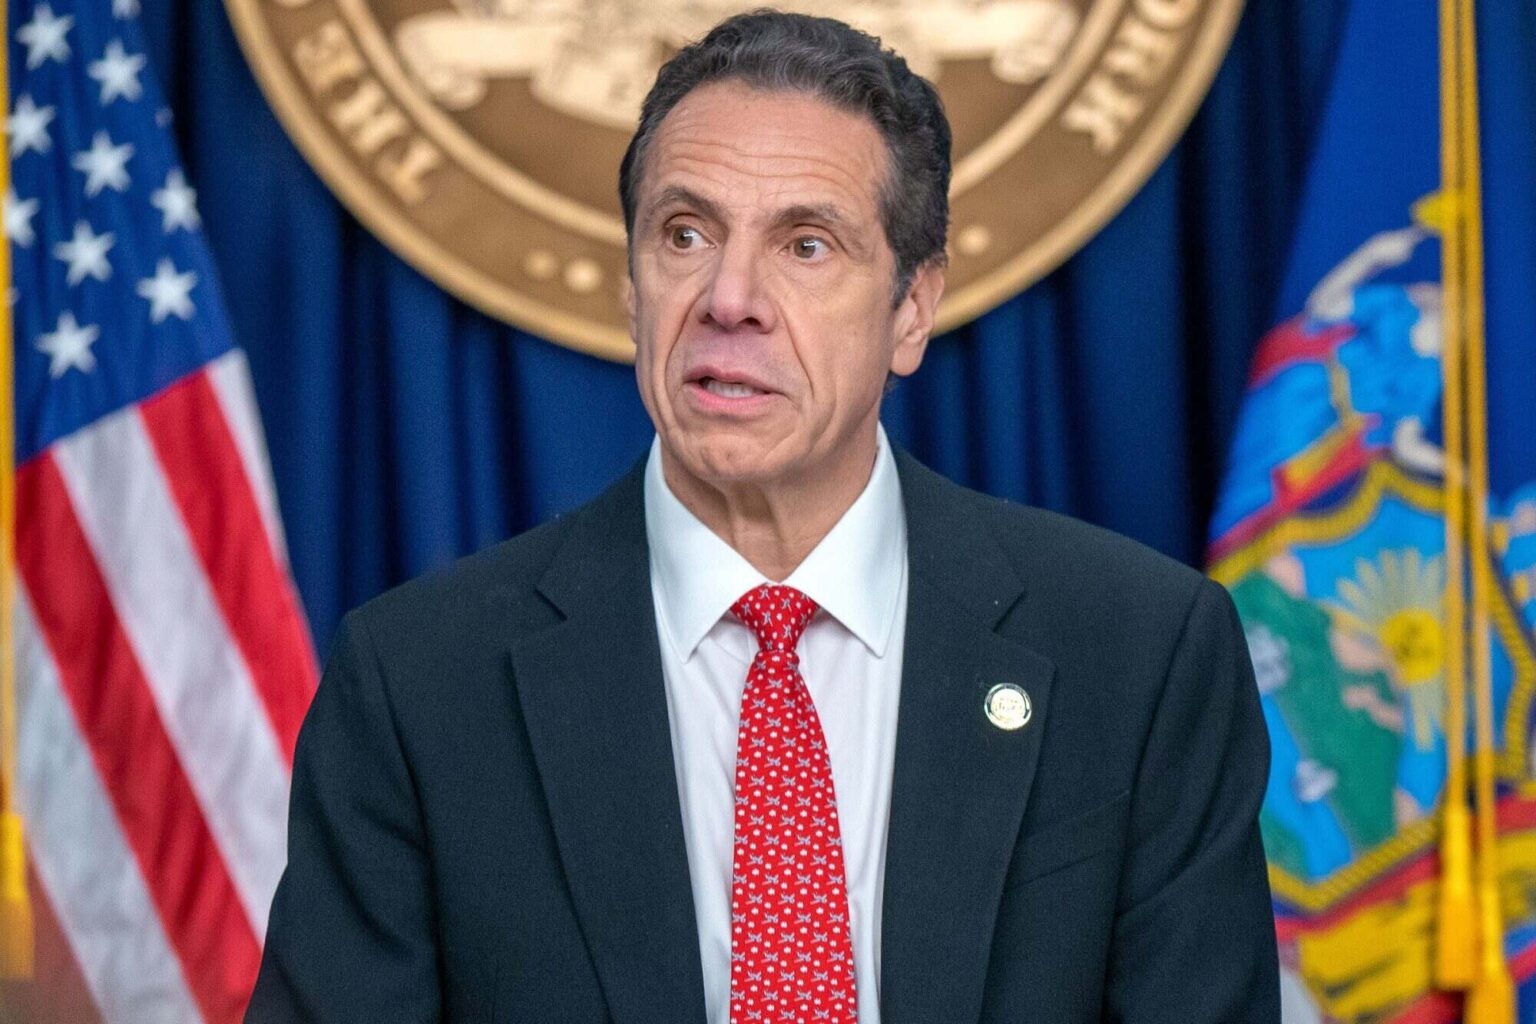 Did Andrew Cuomo's wife know about his cheating? Looks like Andrew Cuomo is under fire for sexual harassment claims. Here's everything you need to know.